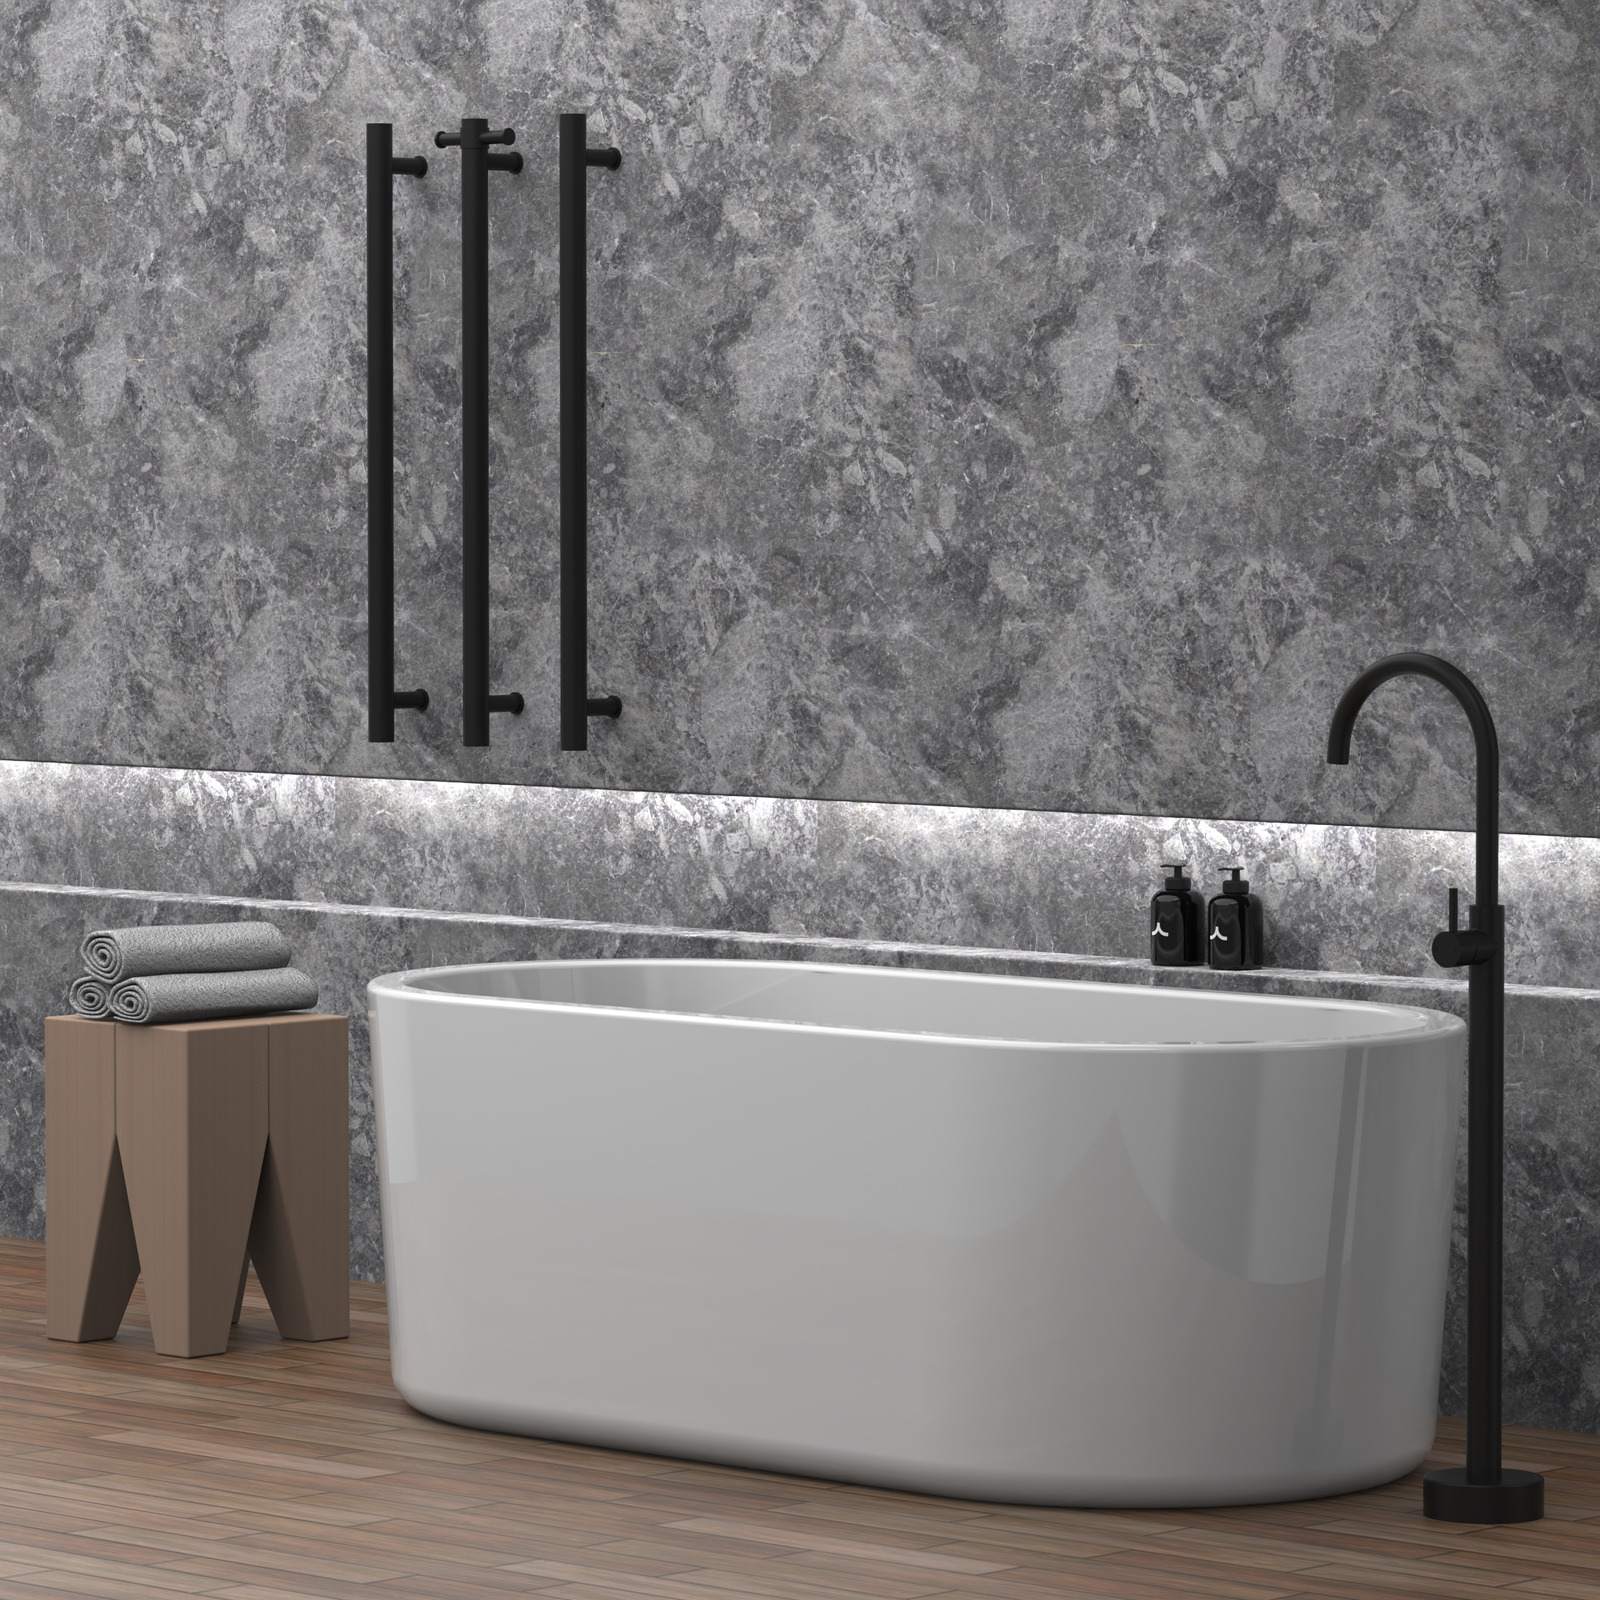 PAR TAPS. Copyright of PAR TAPS. Render of bathroom with standalone bathtub and standing sink, finished in matte black. Marble wall finish and timber flooring. 